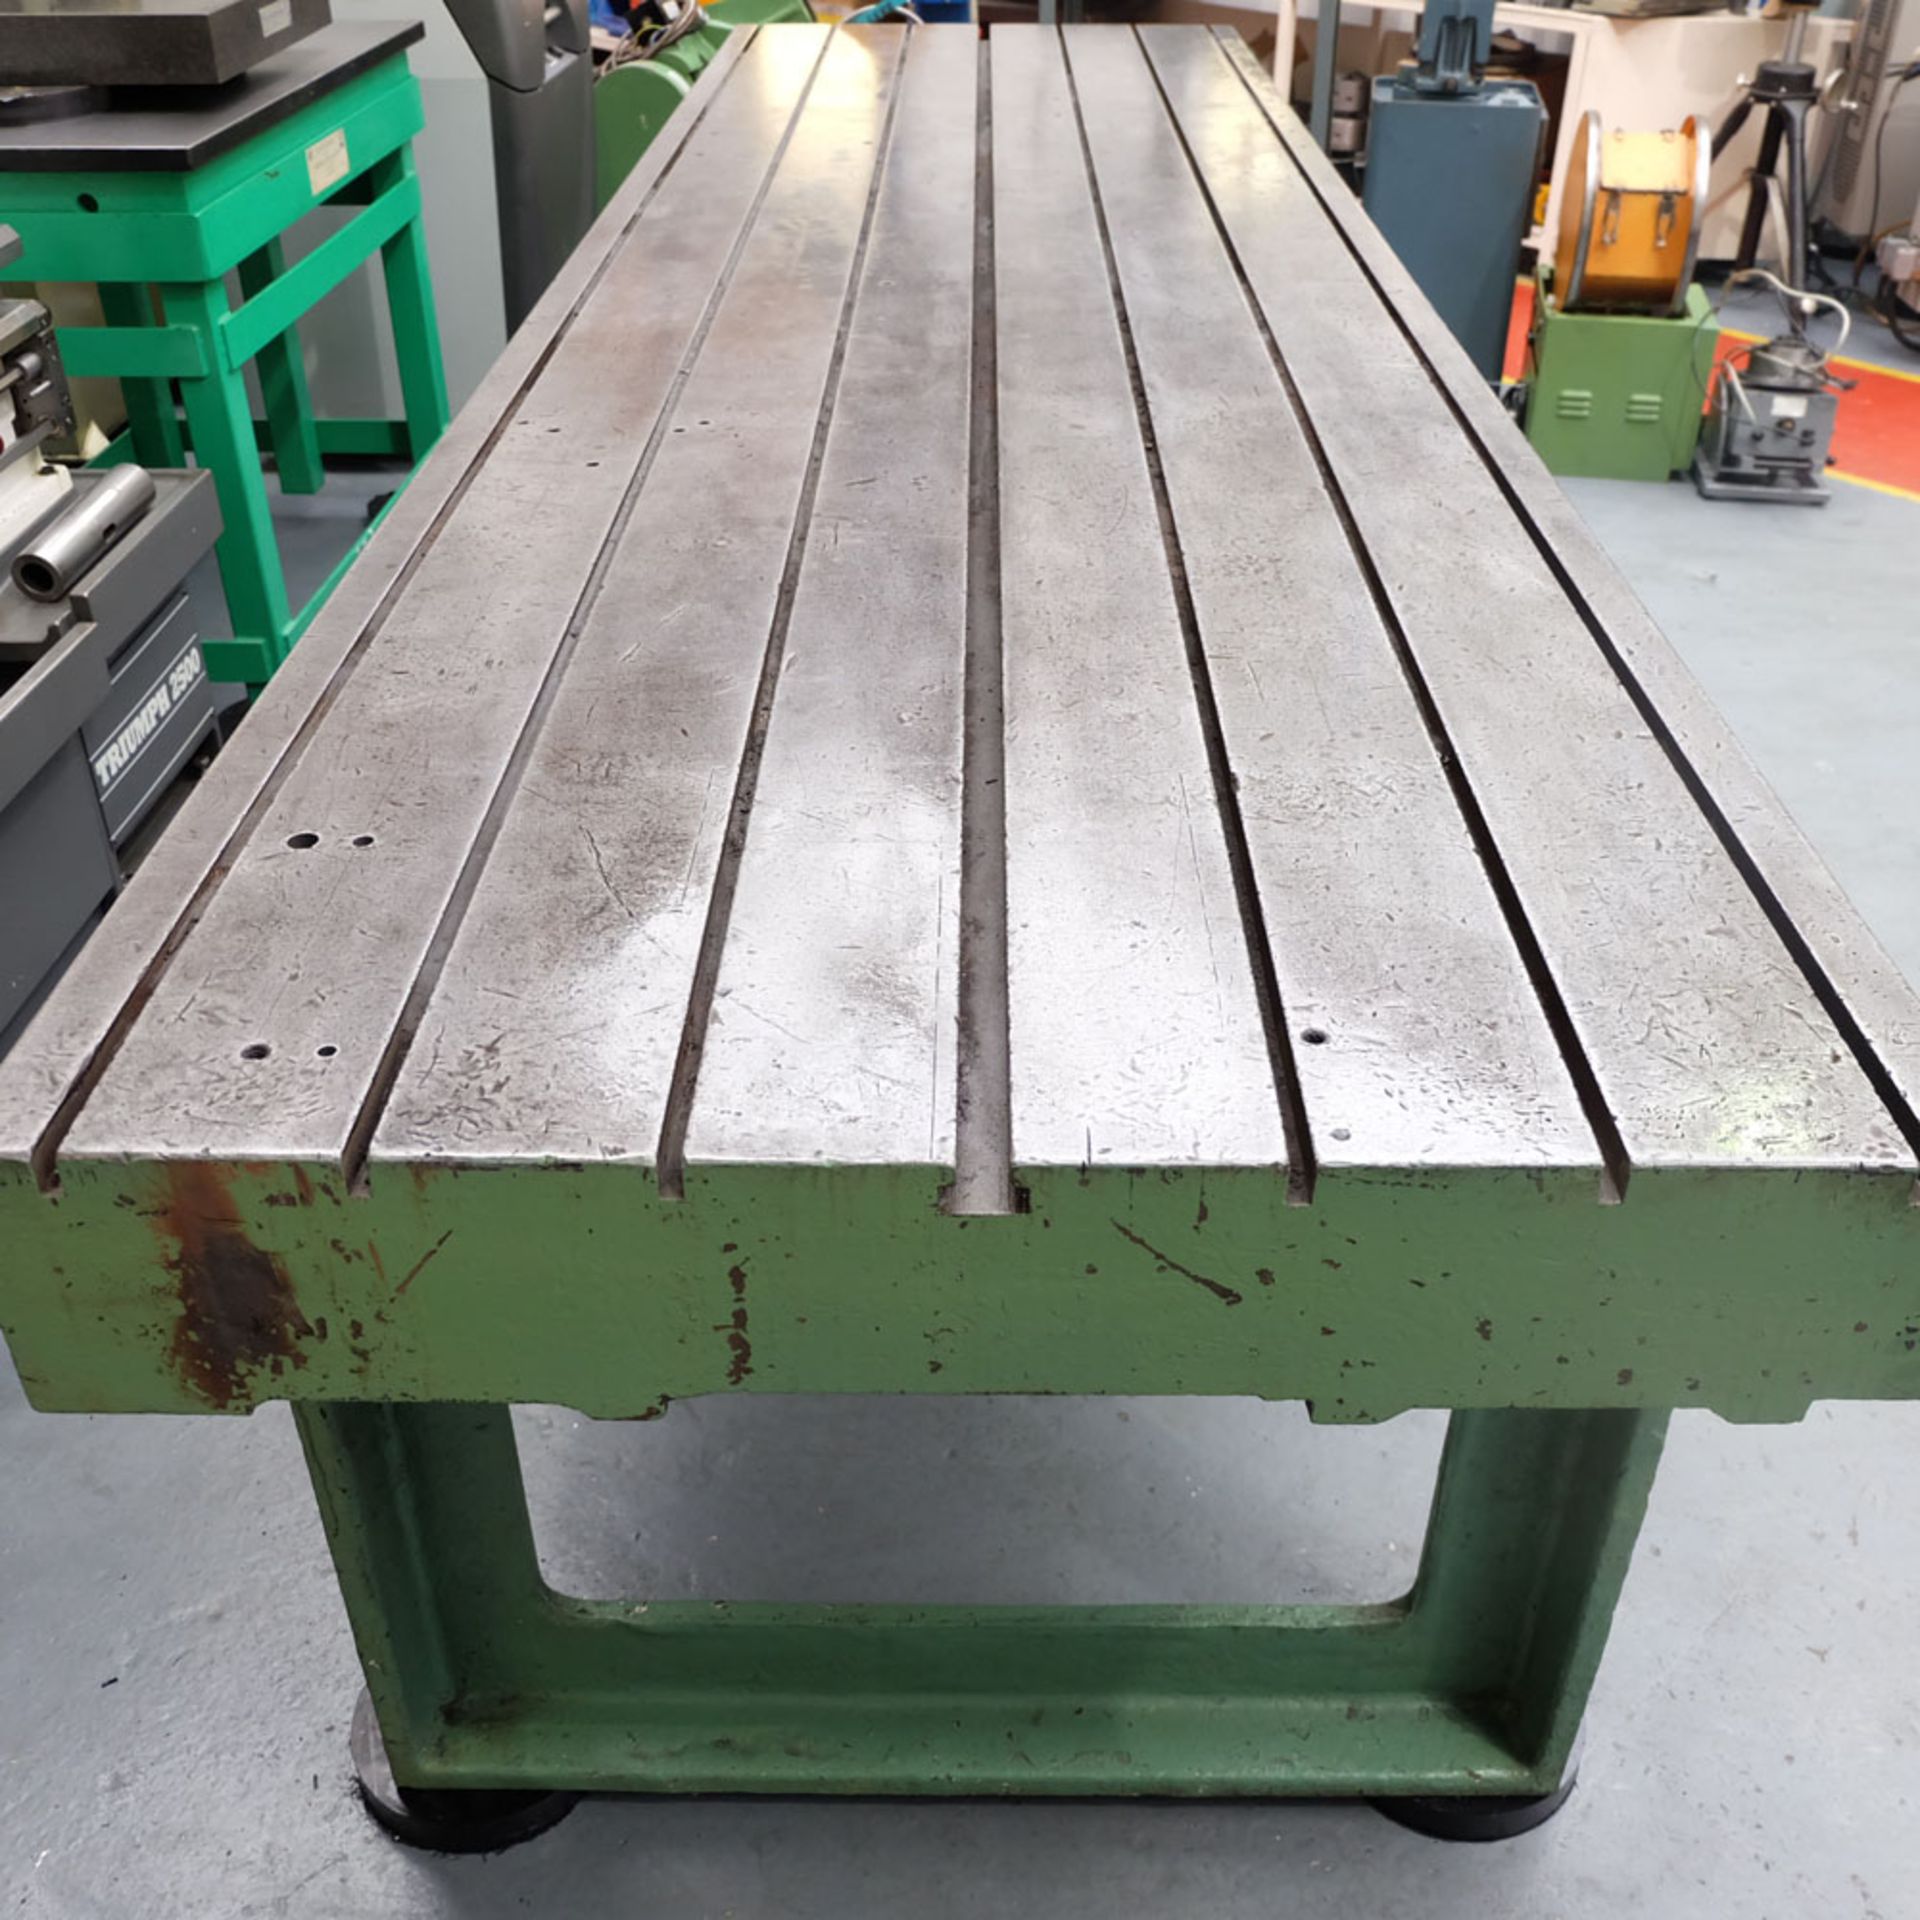 Cast Iron Surface Table With single Central Tee Slot. Size 11' 11 1/2" x 40". Thickness 7". - Image 4 of 5